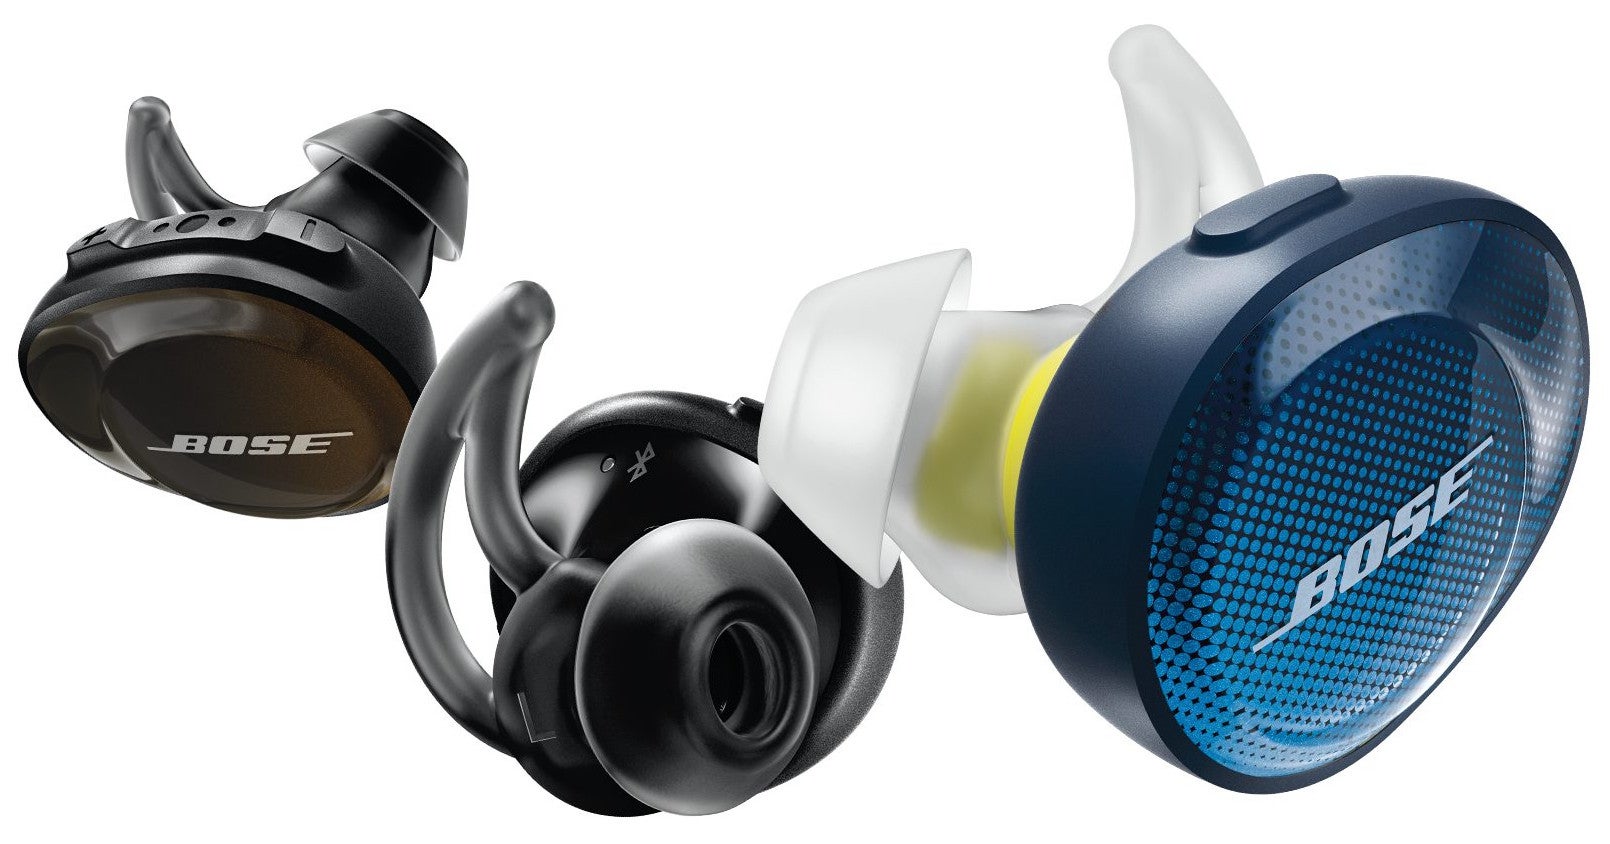 Bose SoundSport Free wireless headphones go on sale for $250, ship in 2 to 3 weeks